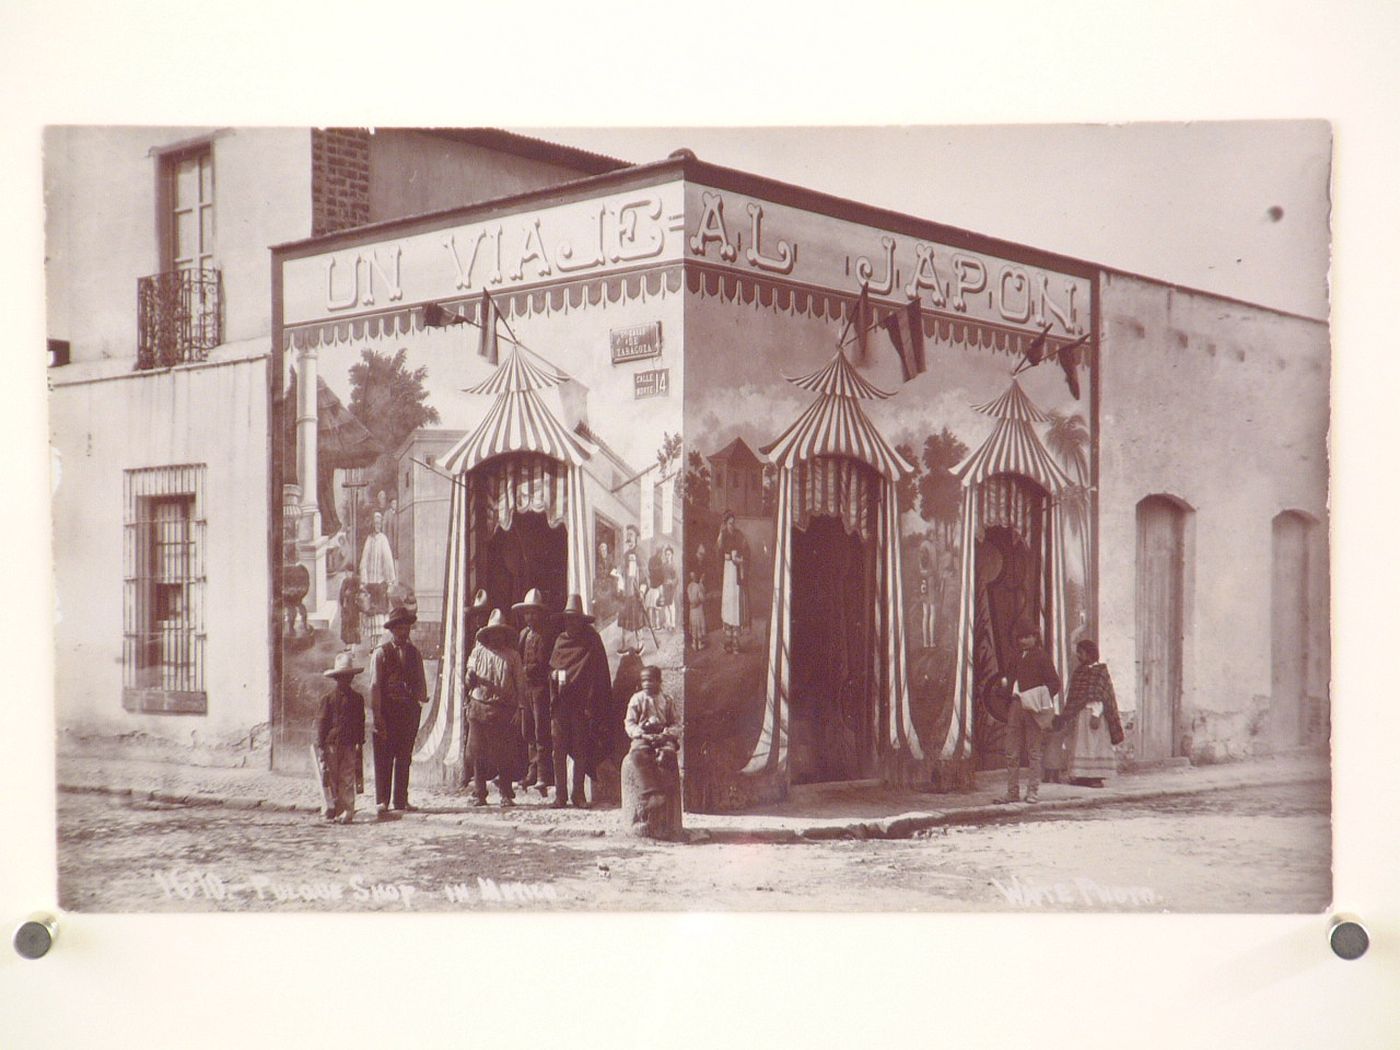 Pulque Shop on corner, with figures out front, Mexico